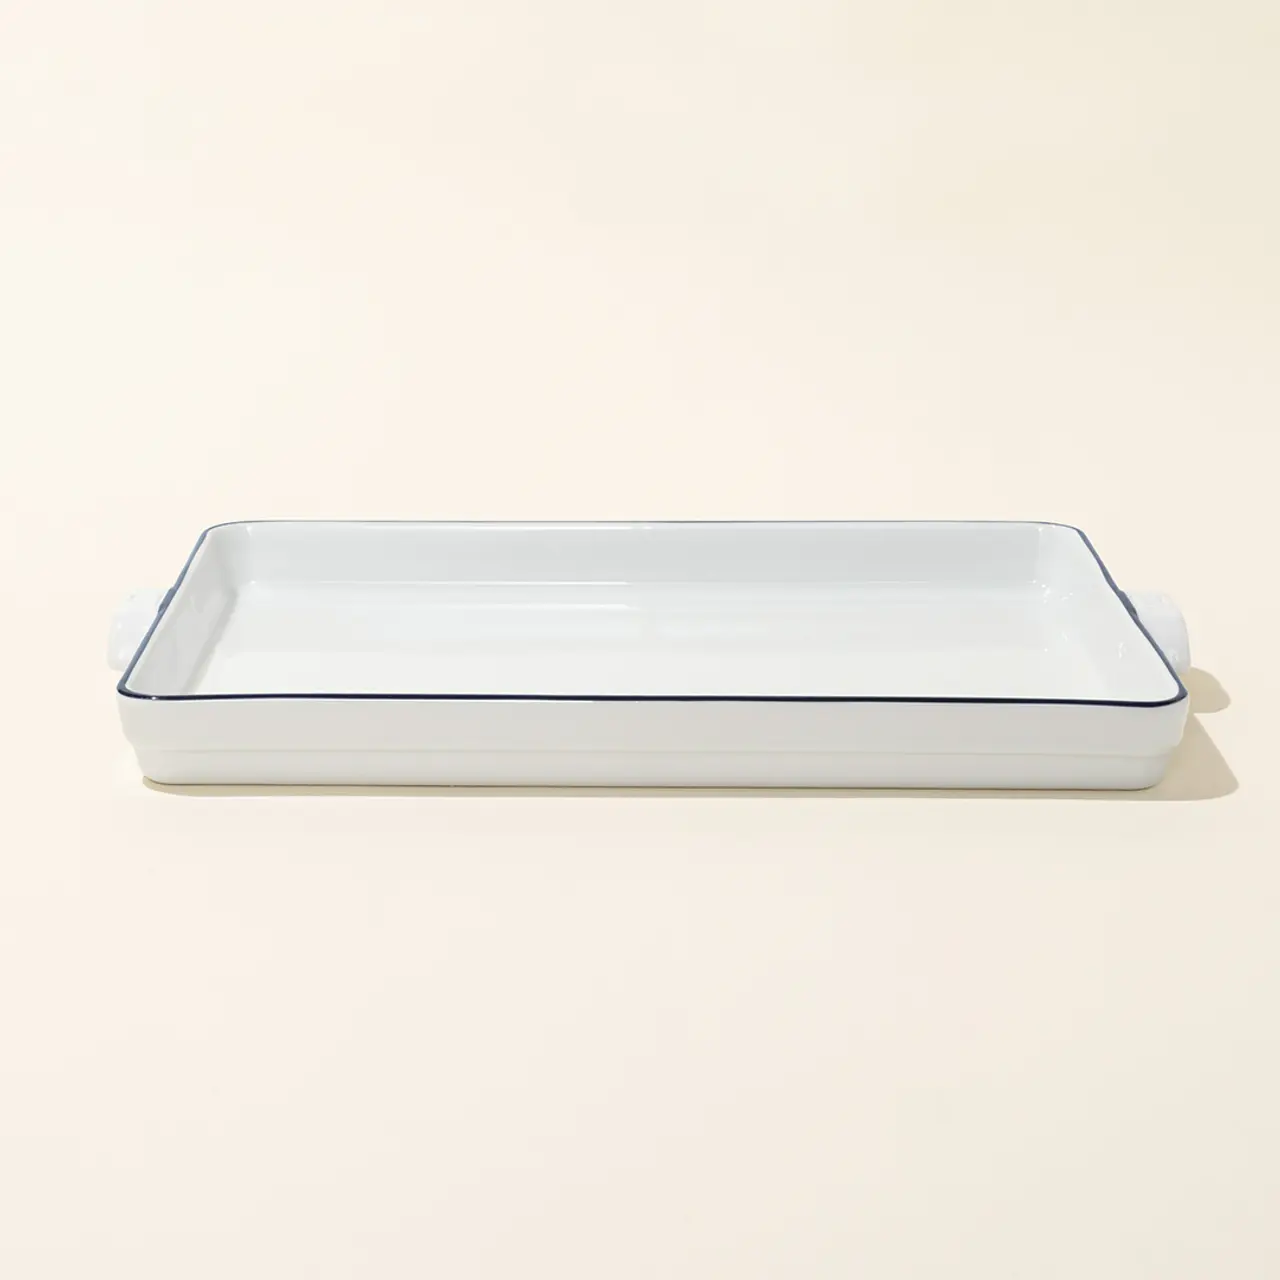 A rectangular ceramic baking dish with a blue rim on a neutral background.